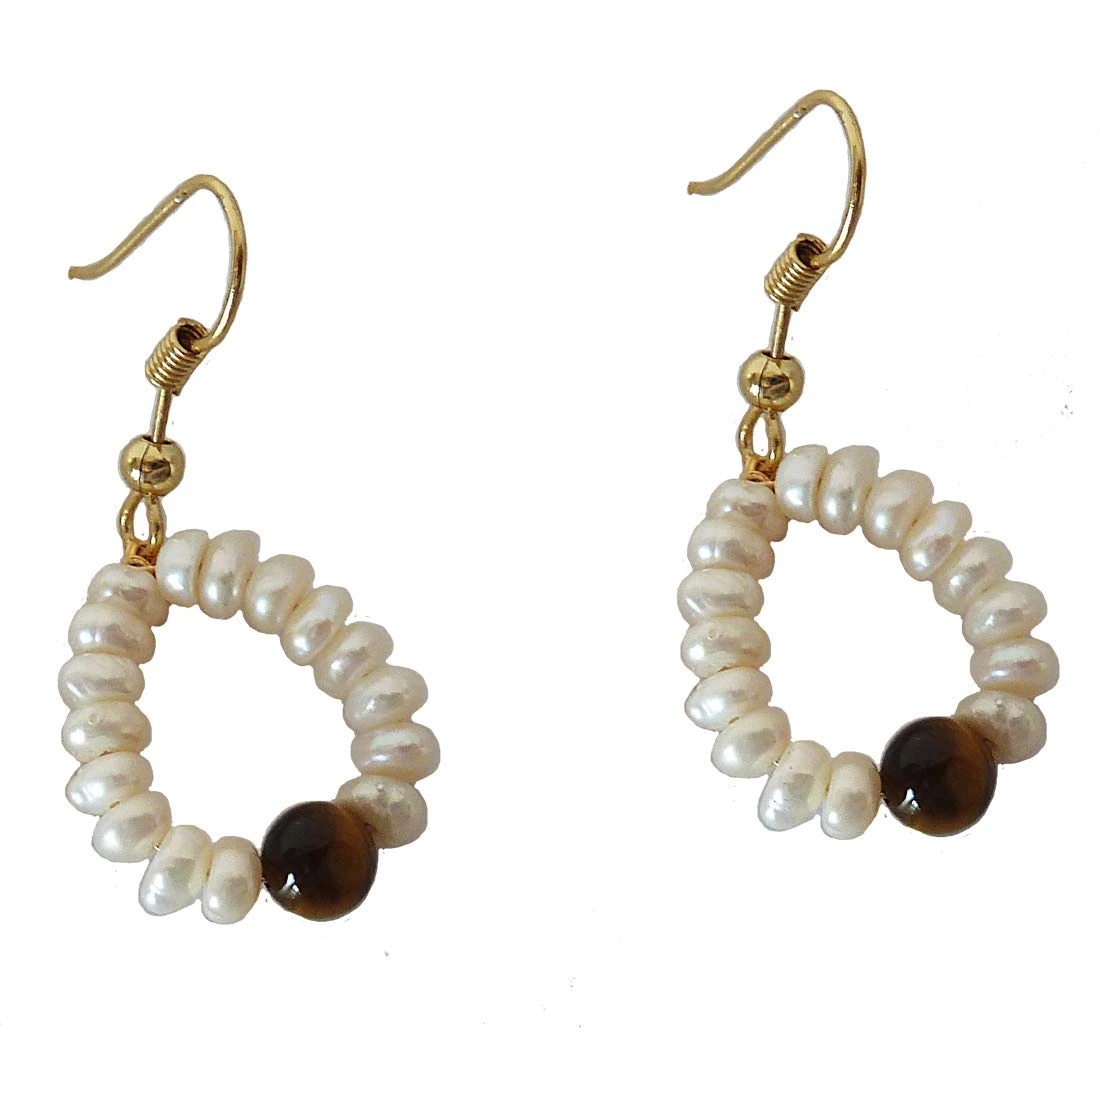 Dangling Circular Tiger Eye Beads, Freshwater Pearl and Gold Plated Wire Style Earrings (SE380)